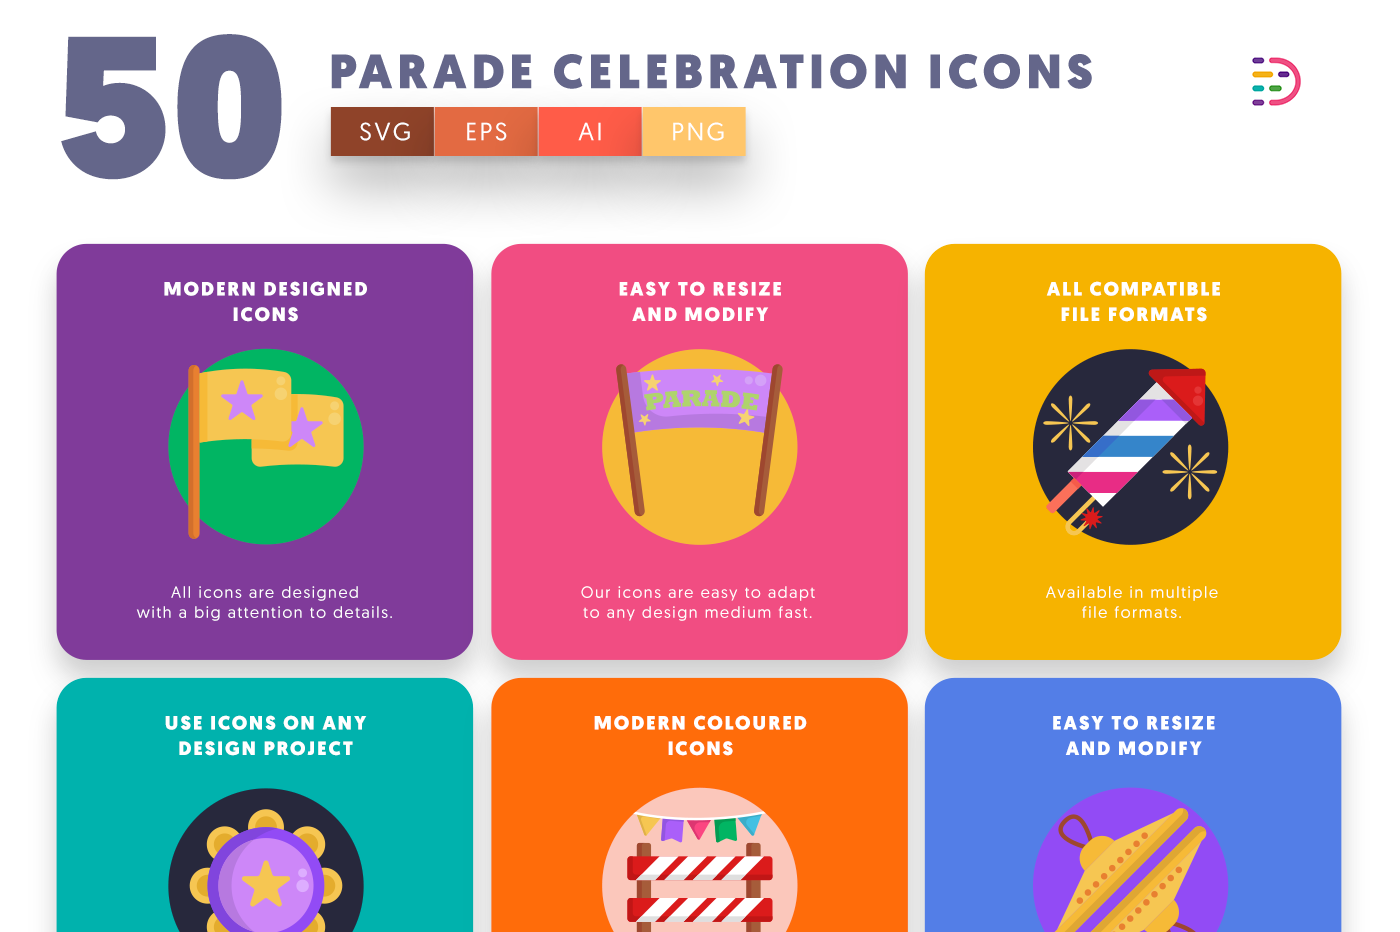 Parade Celebration Icons with colored backgrounds 